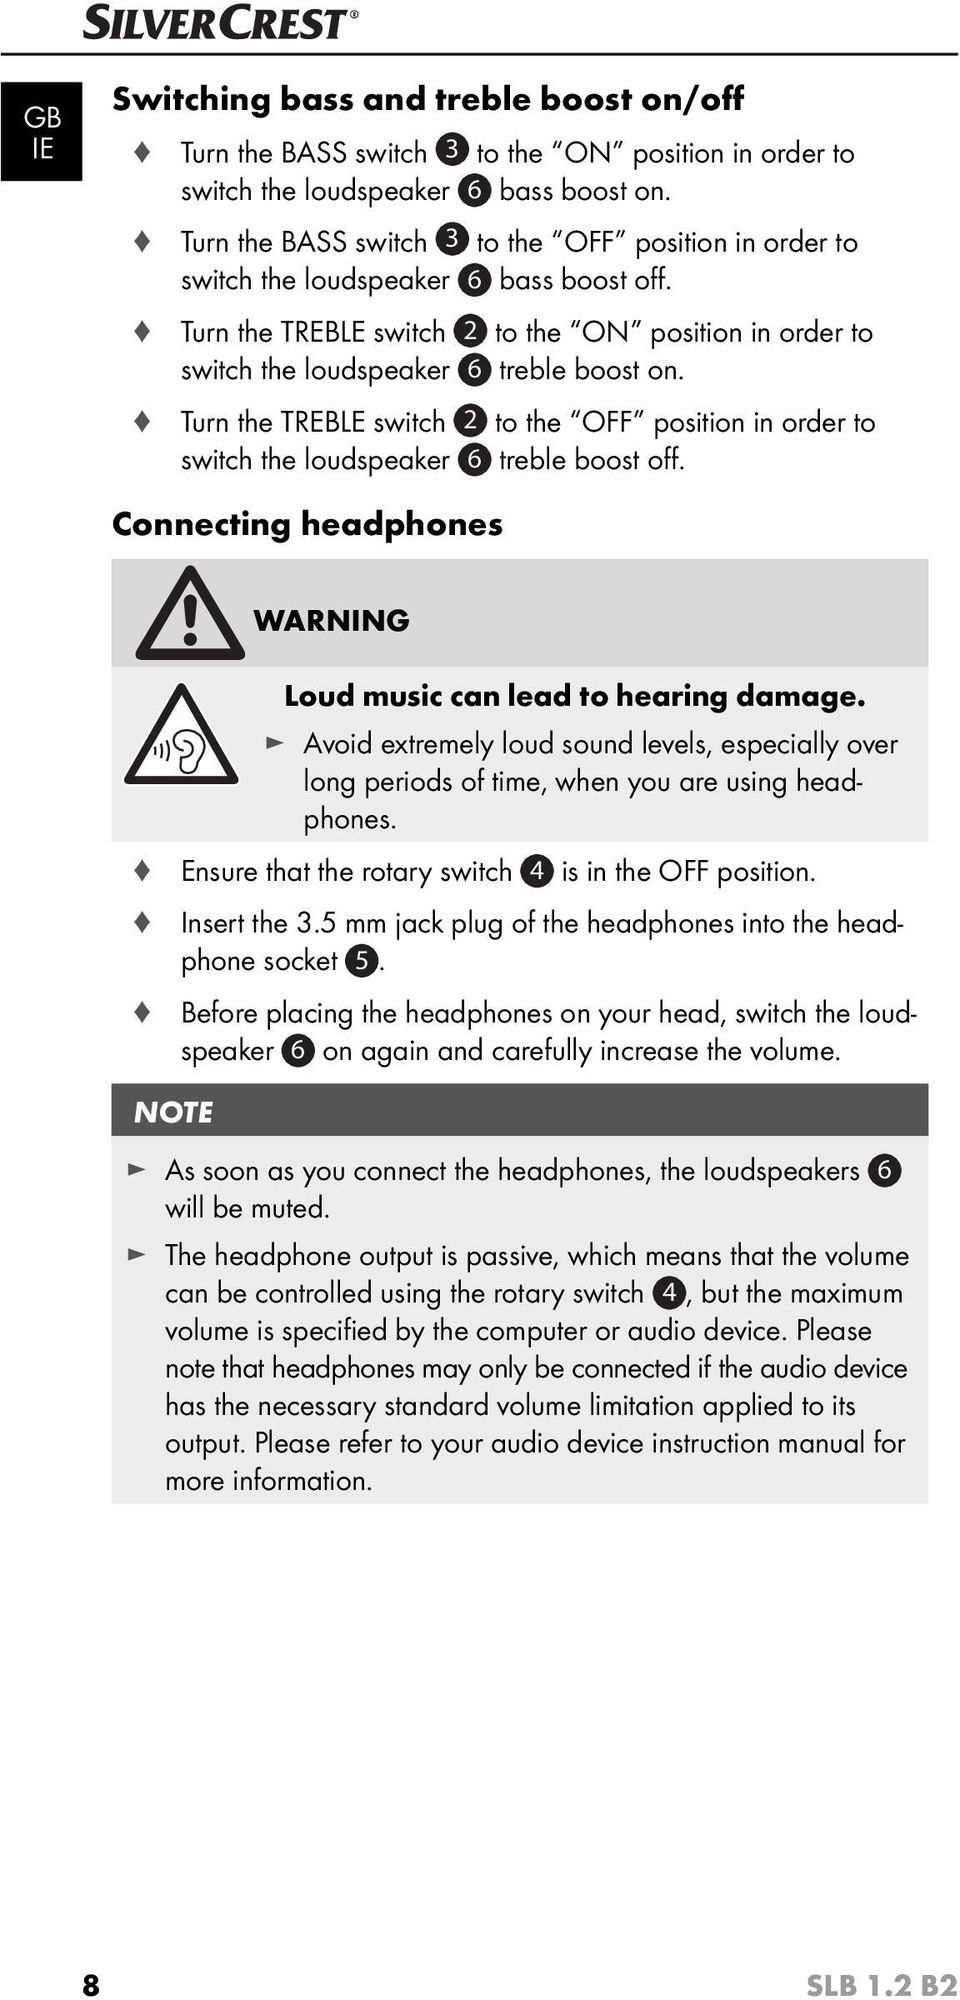 Turn the TREBLE switch 2 to the OFF position in order to switch the loudspeaker 6 treble boost off. Connecting headphones WARNING Loud music can lead to hearing damage.